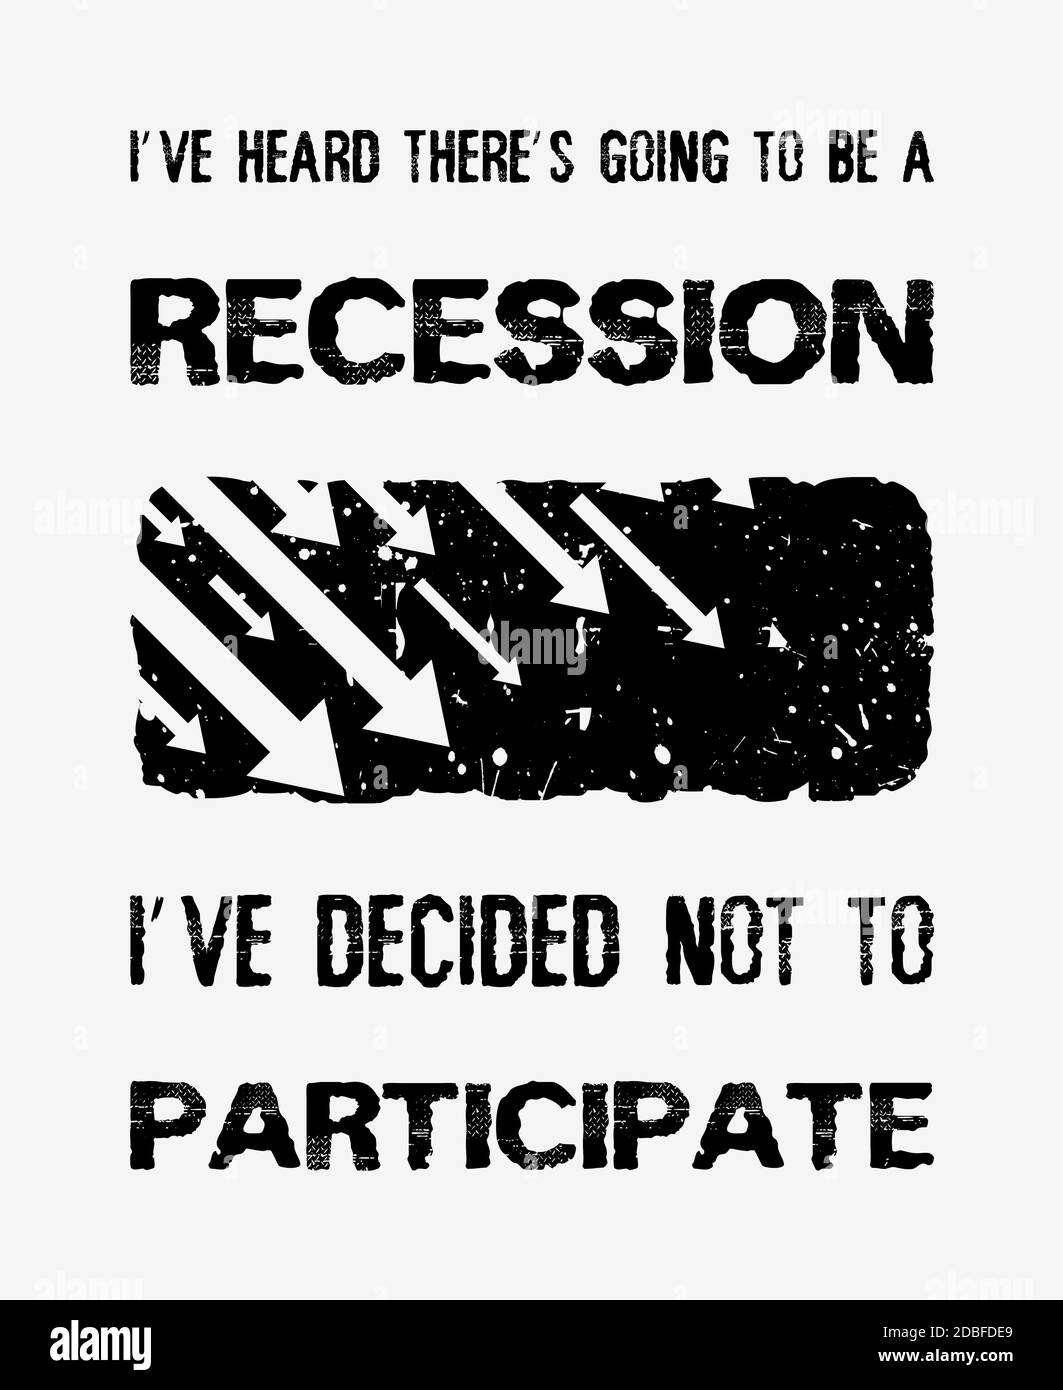 I've heard there’s going to be a recession, i've decided not to participate, funny quote by Walt Disney. Optimistic text art illustration and falling Stock Photo